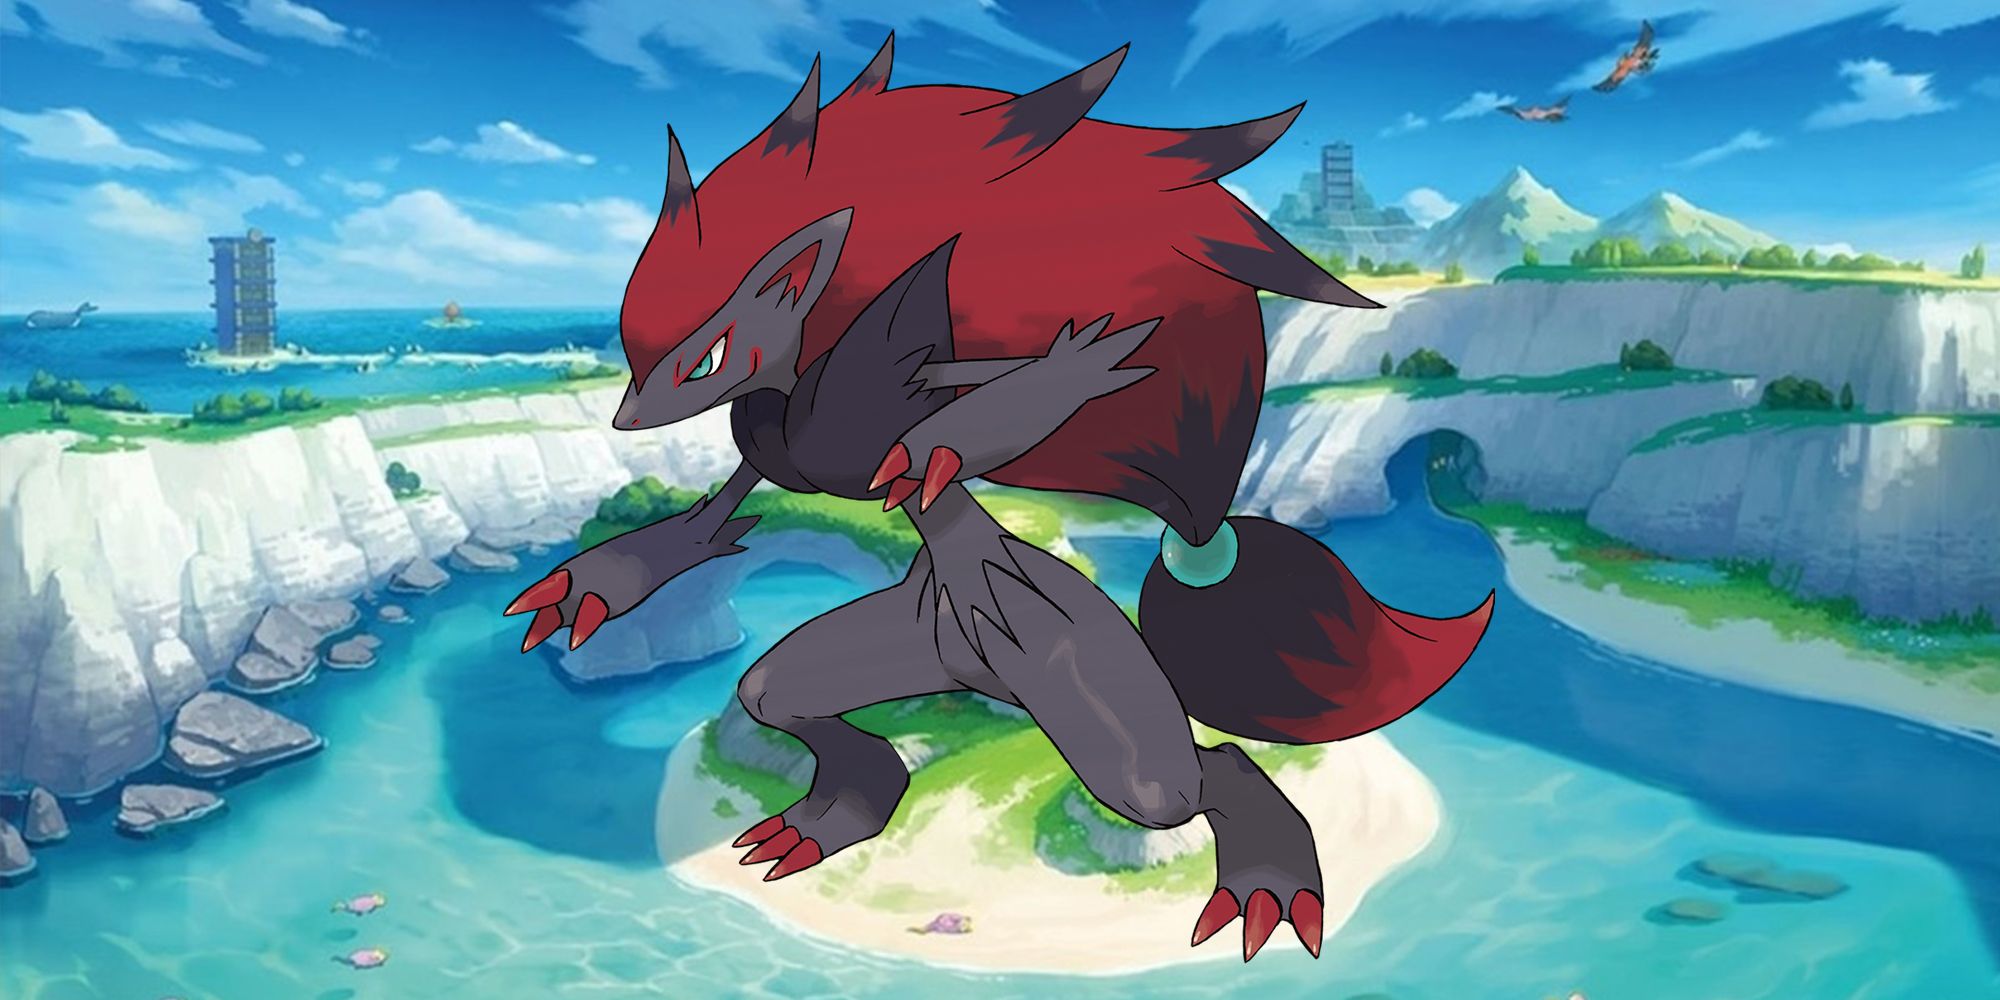 Zoroark stands on an island during the daytime in Pokemon.